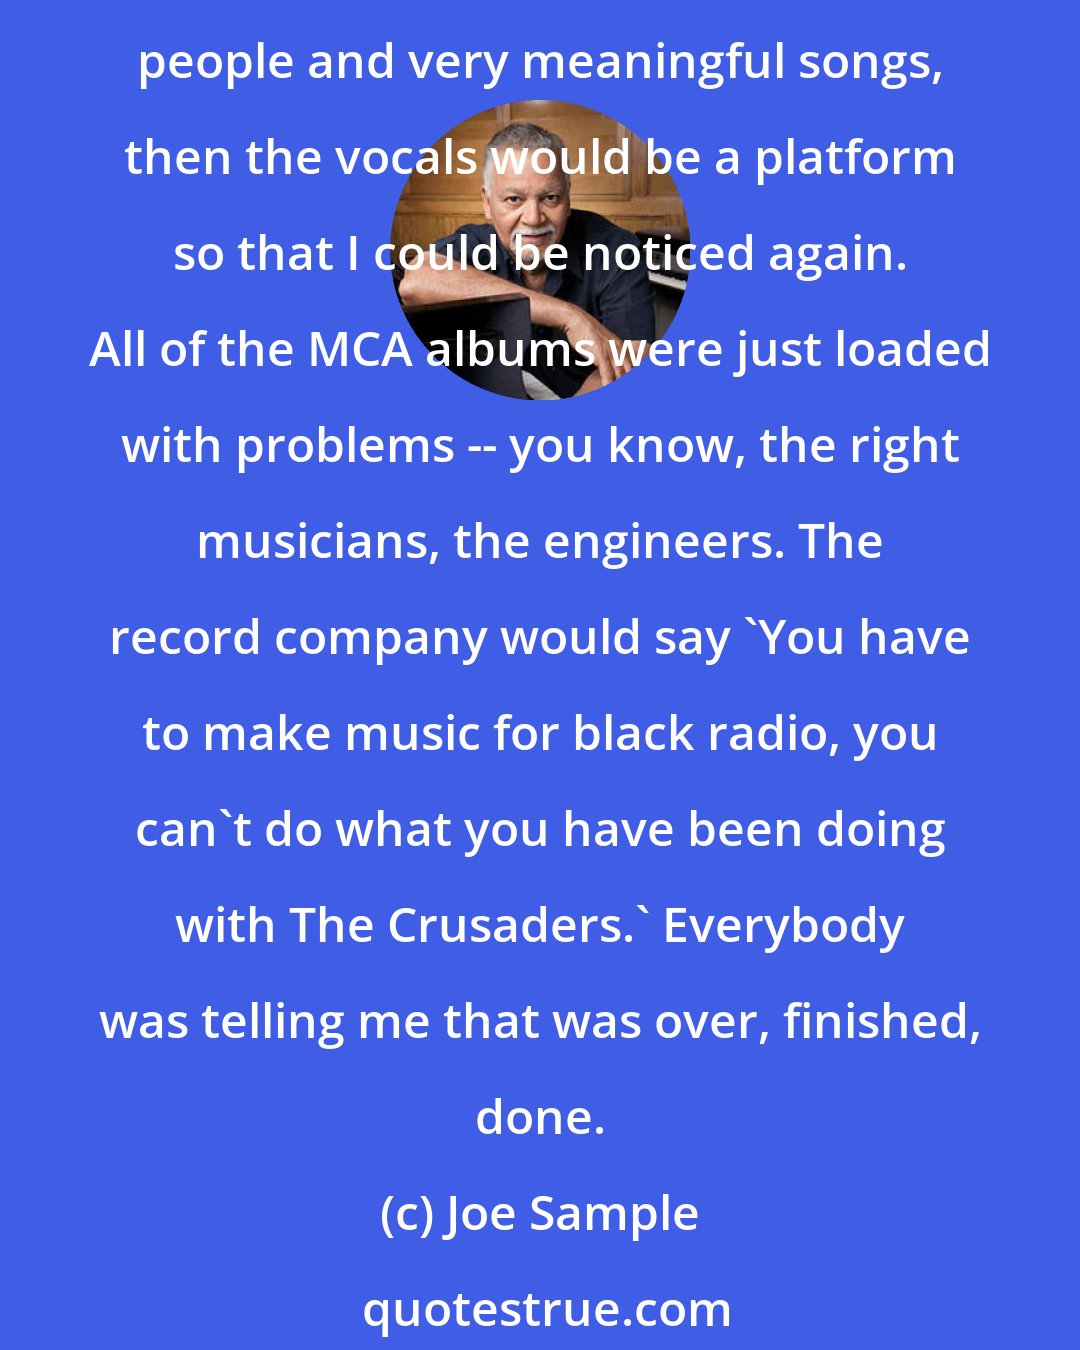 Joe Sample: That was an idea of the record company, and also that was my first album after MCA and we wanted to come back with a strong album that would be noticed. If we put the vocals by very talented people and very meaningful songs, then the vocals would be a platform so that I could be noticed again. All of the MCA albums were just loaded with problems -- you know, the right musicians, the engineers. The record company would say 'You have to make music for black radio, you can't do what you have been doing with The Crusaders.' Everybody was telling me that was over, finished, done.